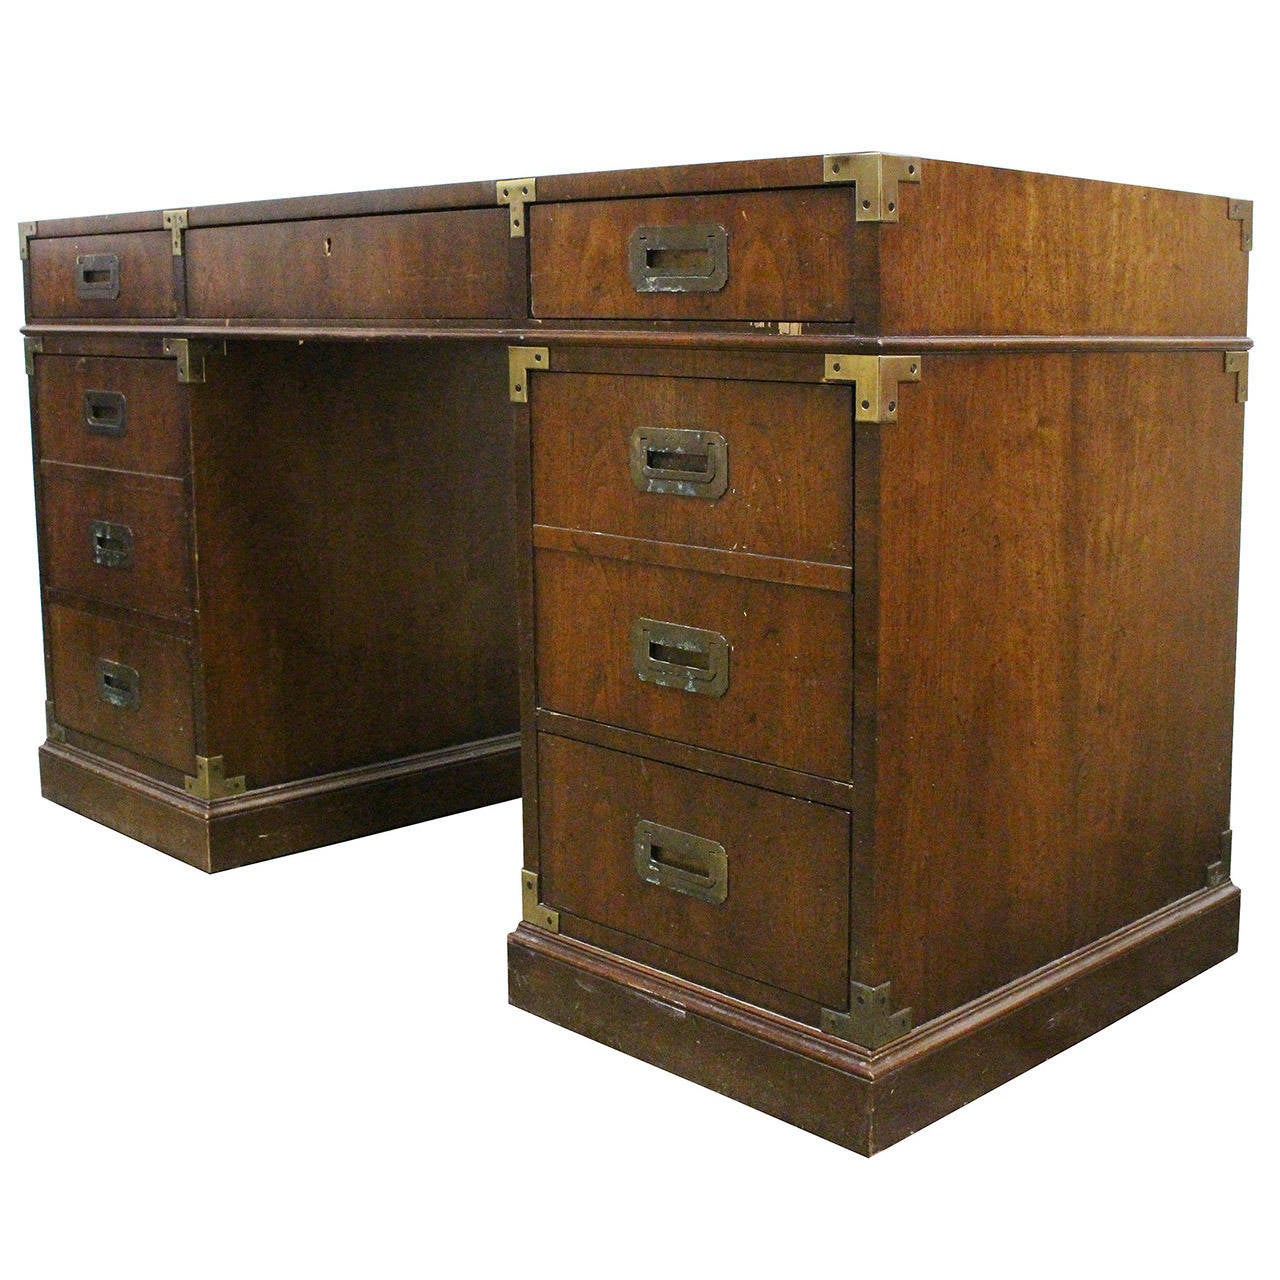 Campaign style desk with brass accents. The desk needs some love and would be perfect with a lacquer finish. There are seven drawers with two drawers for hanging files.

Dimension: 54